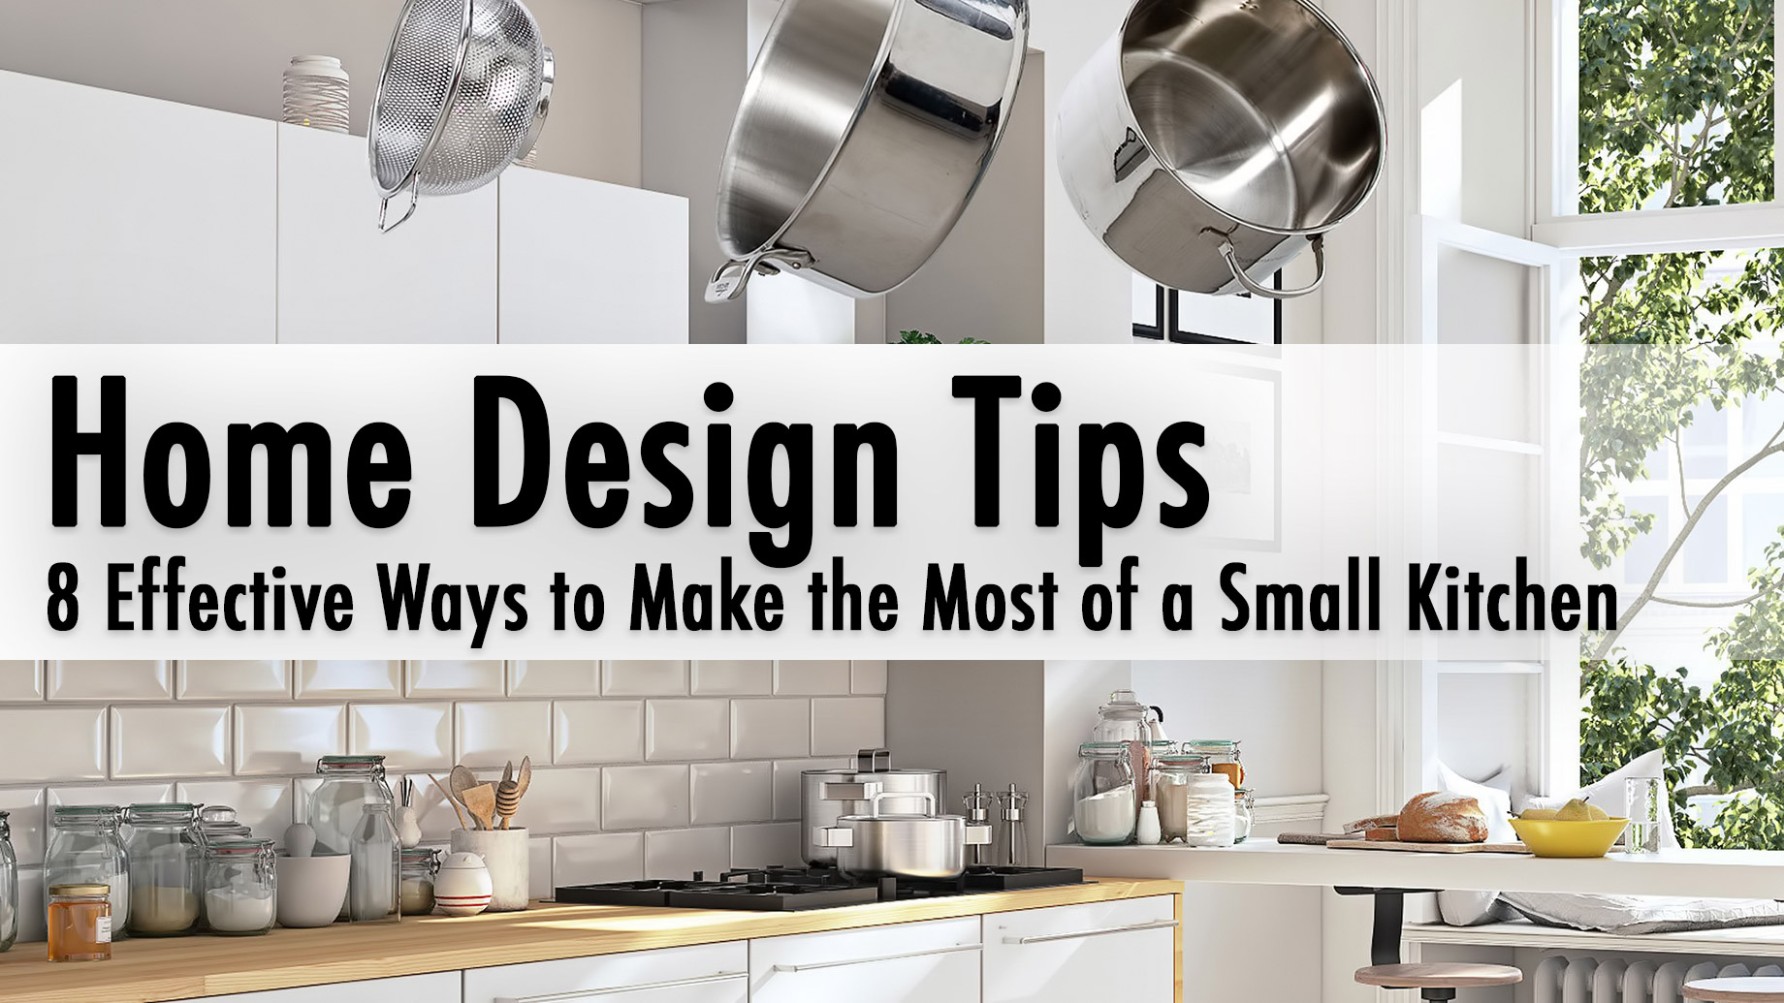 Home Design Tips – 5 Effective Ways to Make the Most of a Small  - what is the best way to build a small kitchen?